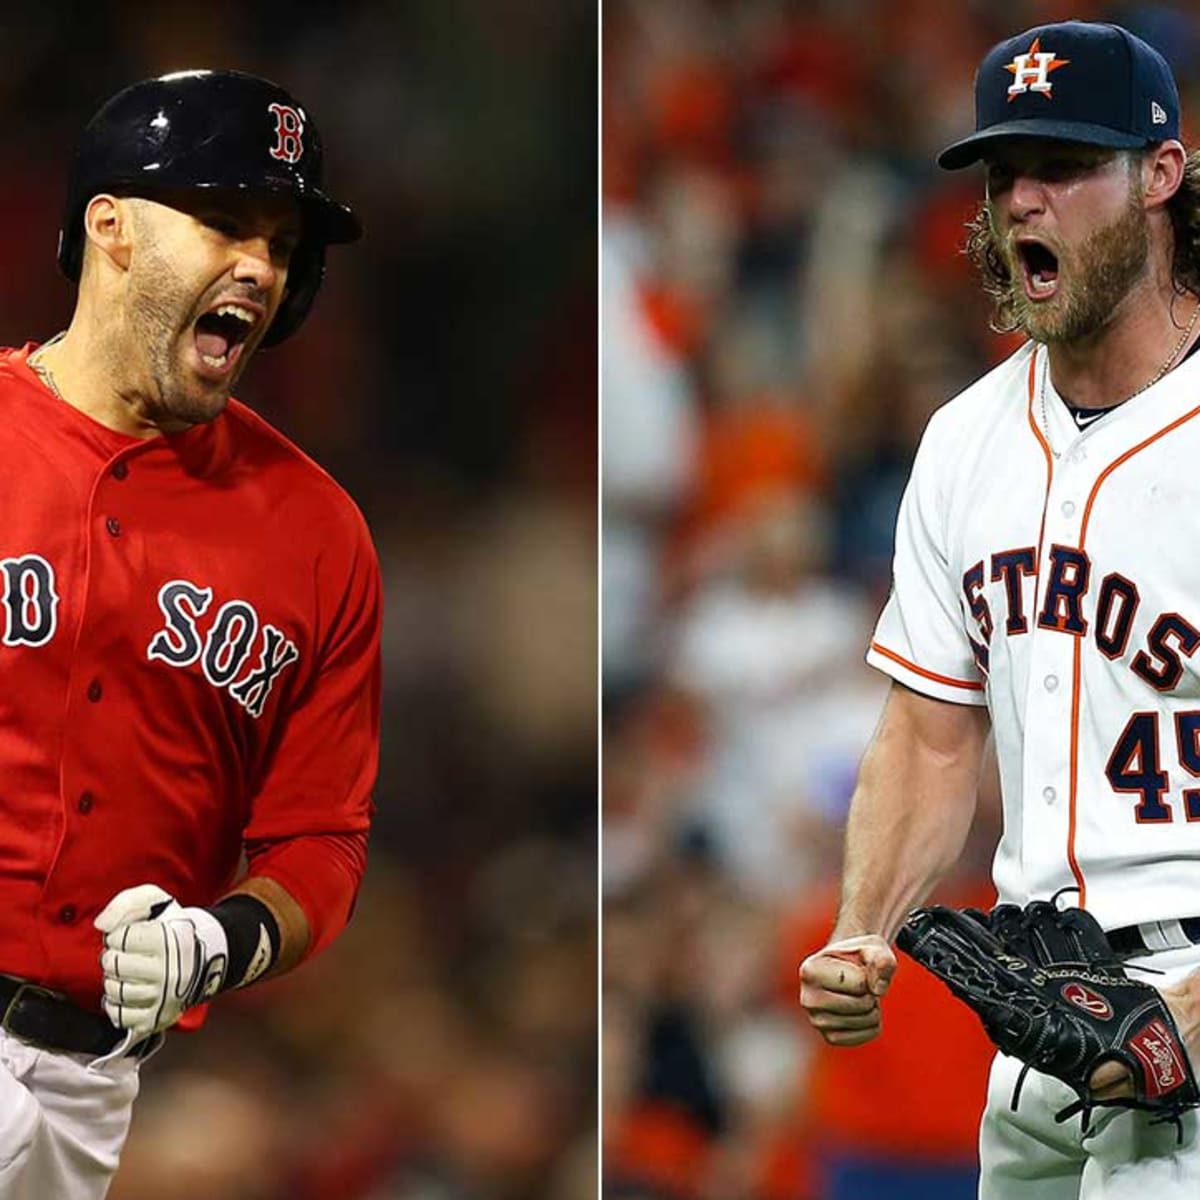 Ian Kinsler and Red Sox advance to World Series, Bregman's Astros out